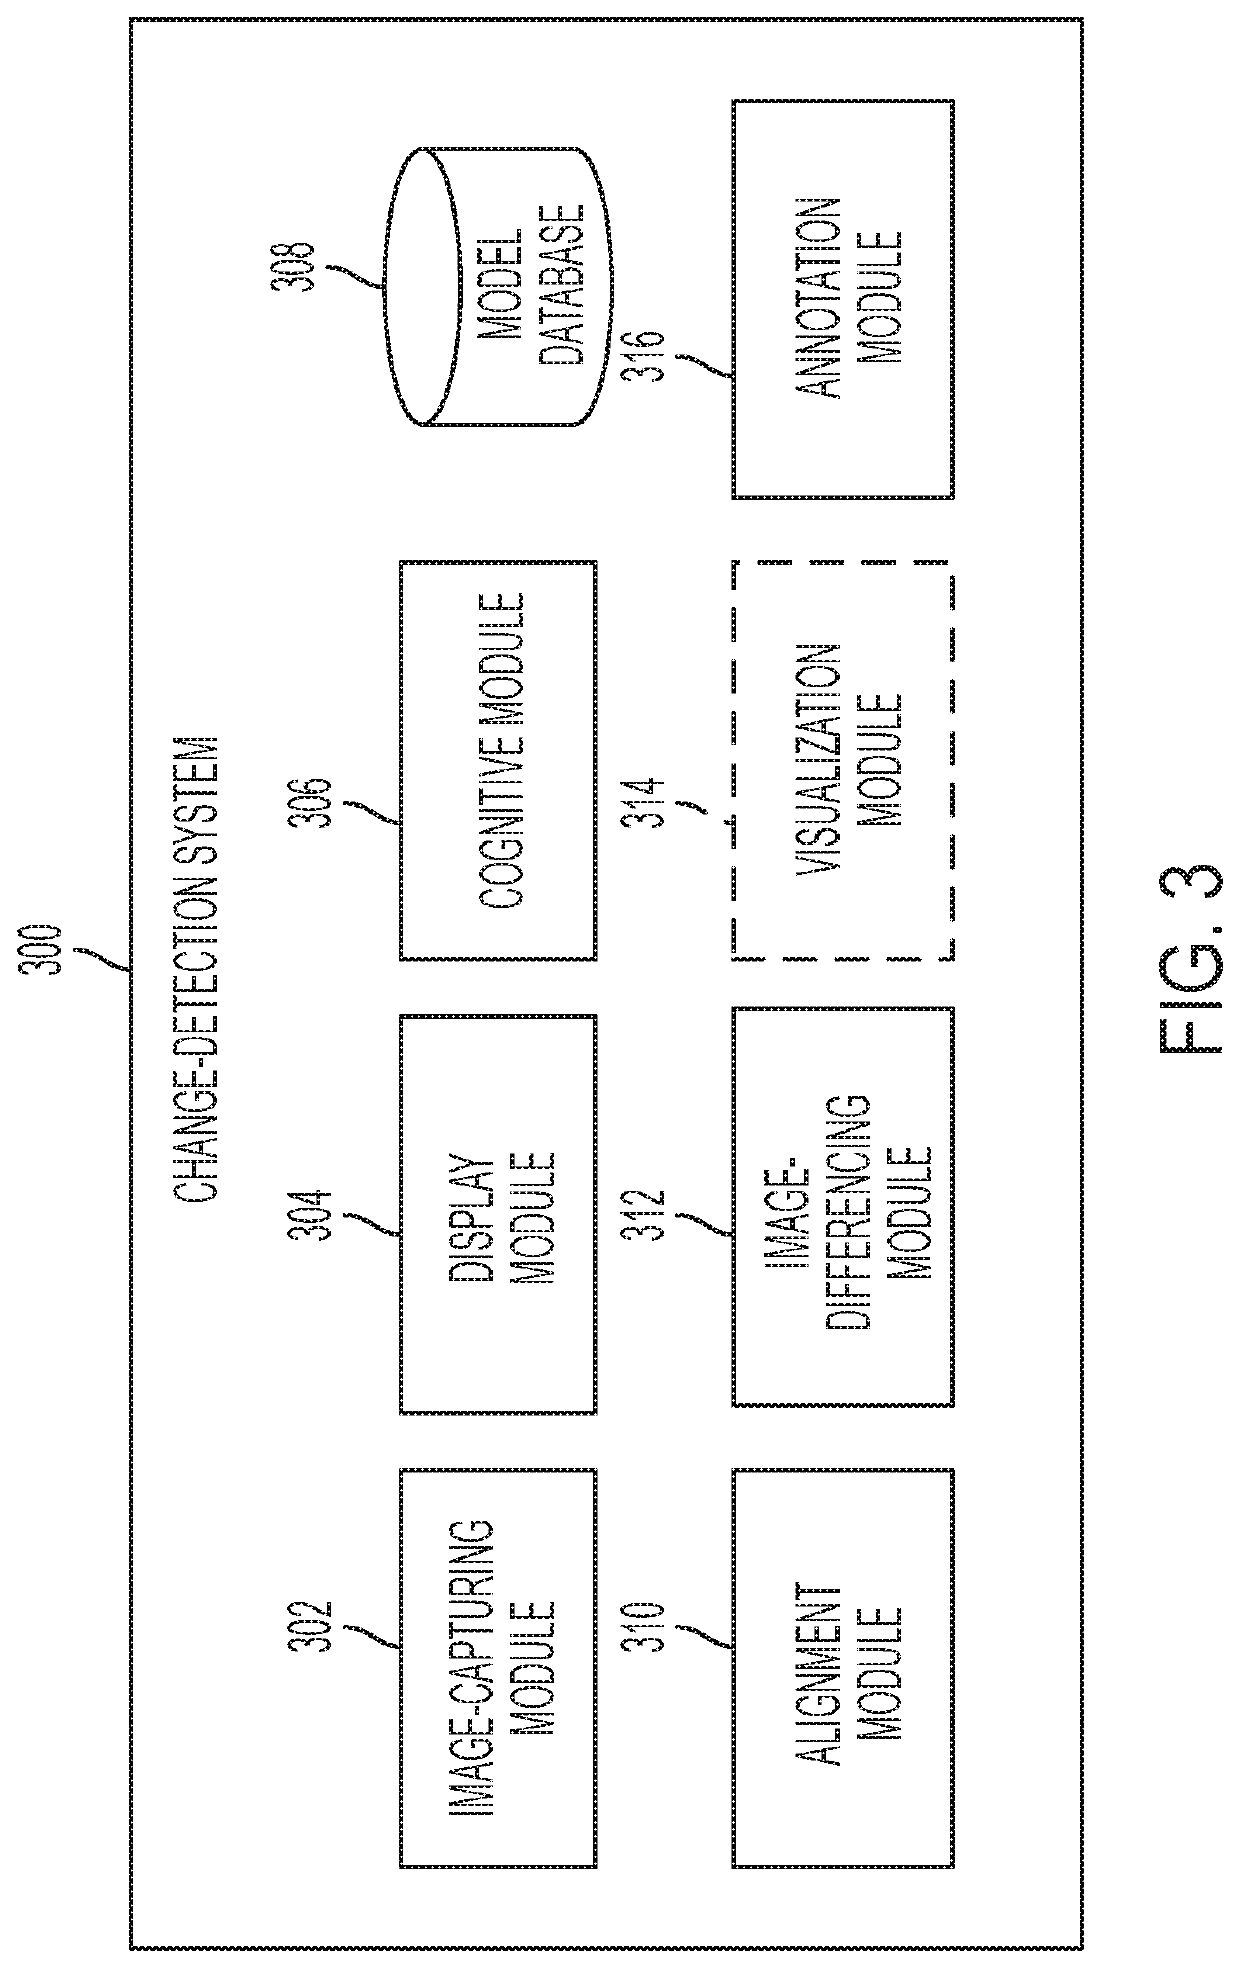 Method and system for change detection using AR overlays